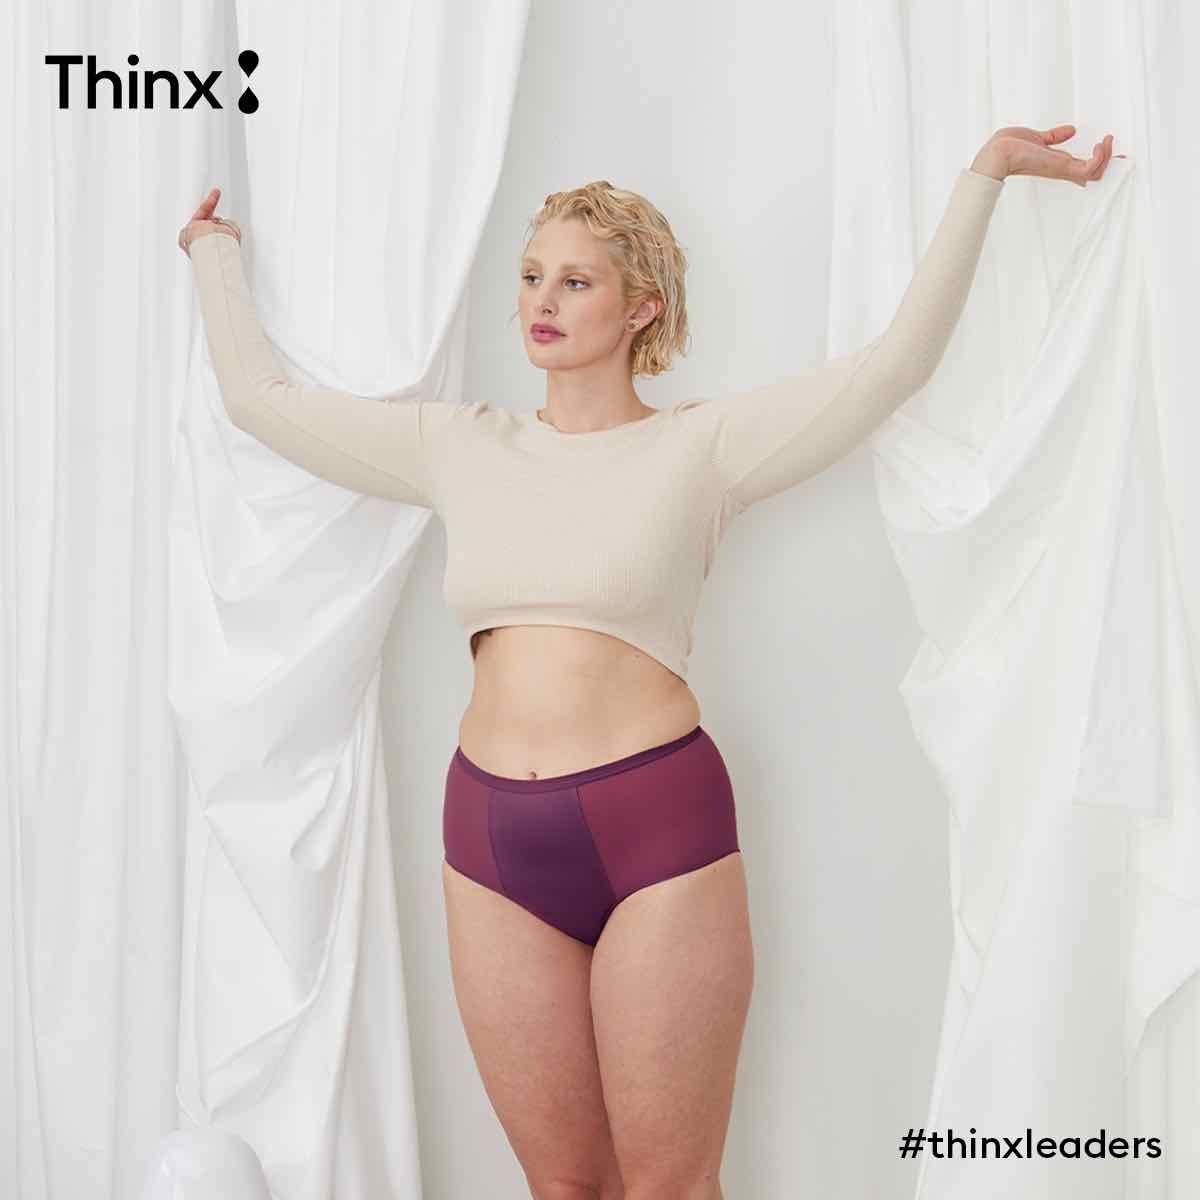 A model (a white woman with short blond hair) wearing a pair of Thinx hi-waist in the bright purple “fig” color, and a white sweater, looking away from the camera.